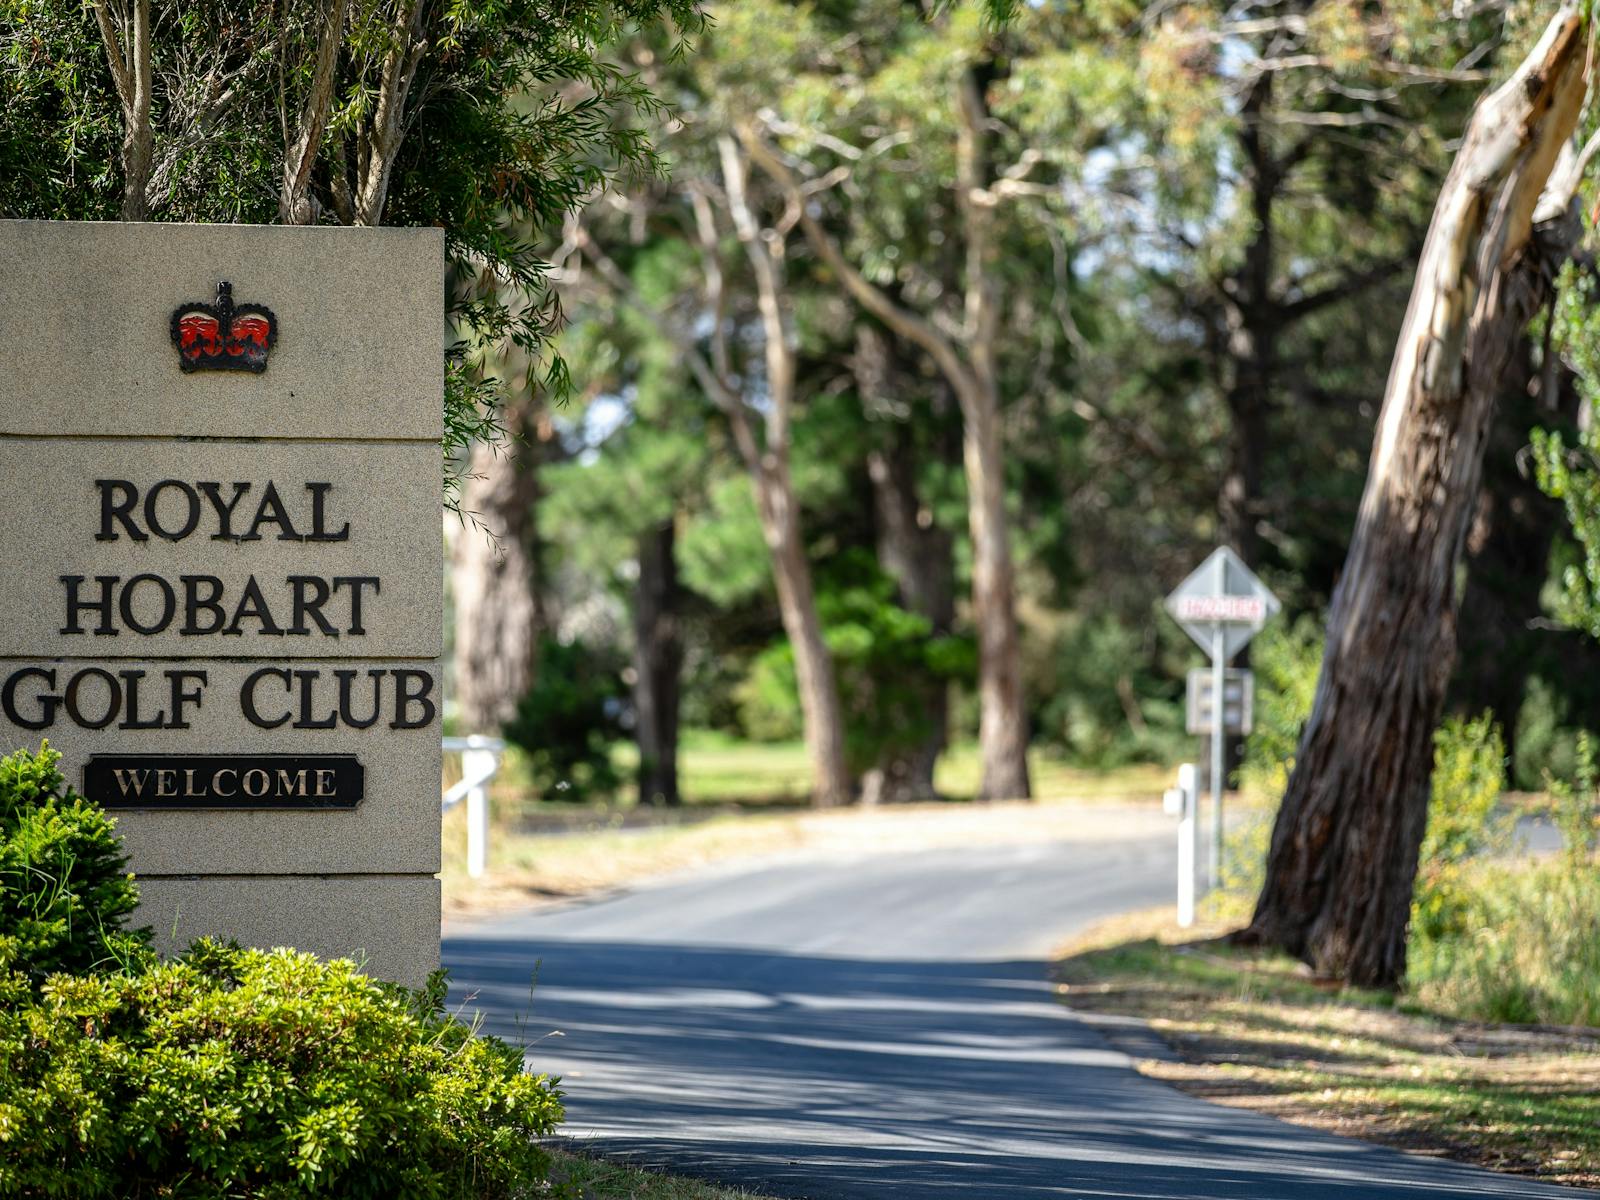 Entrance way, with sign reading 'Royal Hobart Golf Club' and 'Welcome'